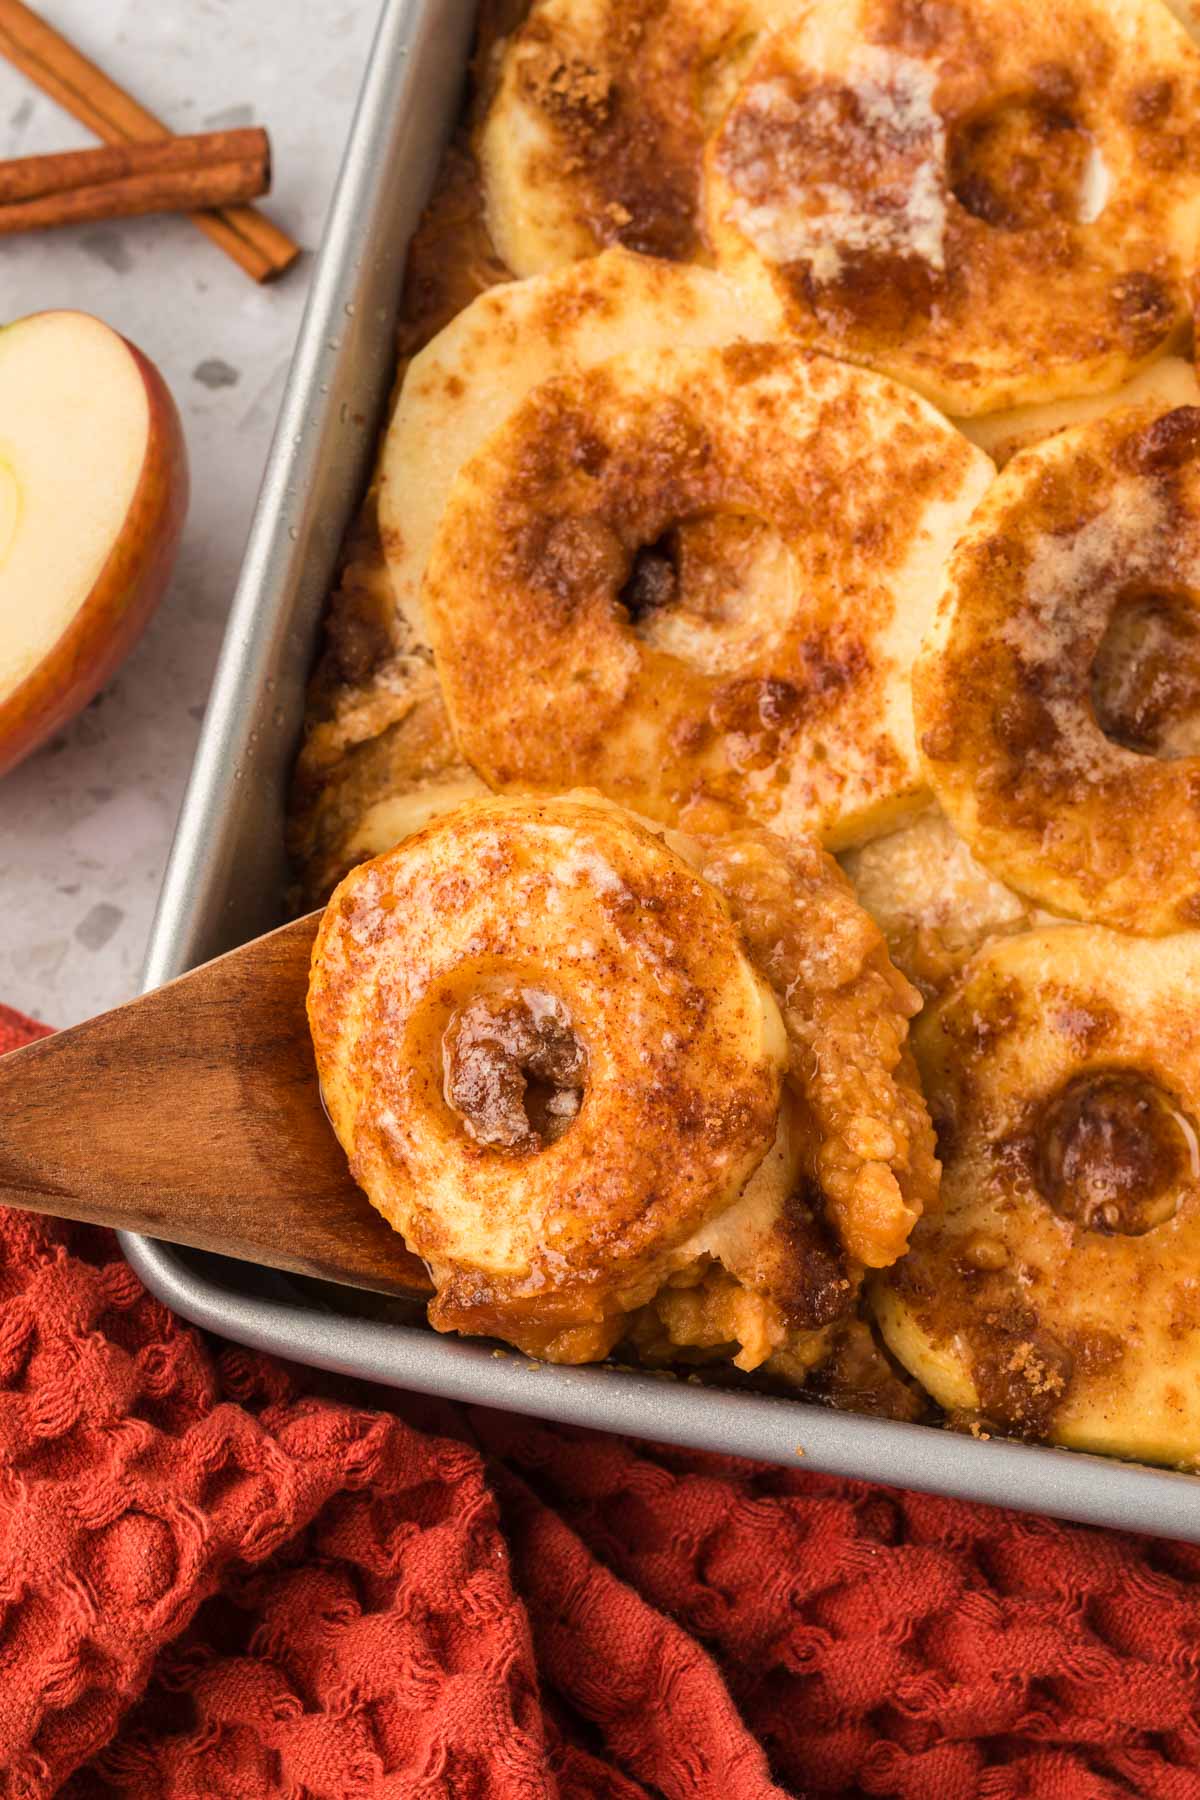 Sweet potato and apple casserole in a baking dish with a serving on a wooden spoon